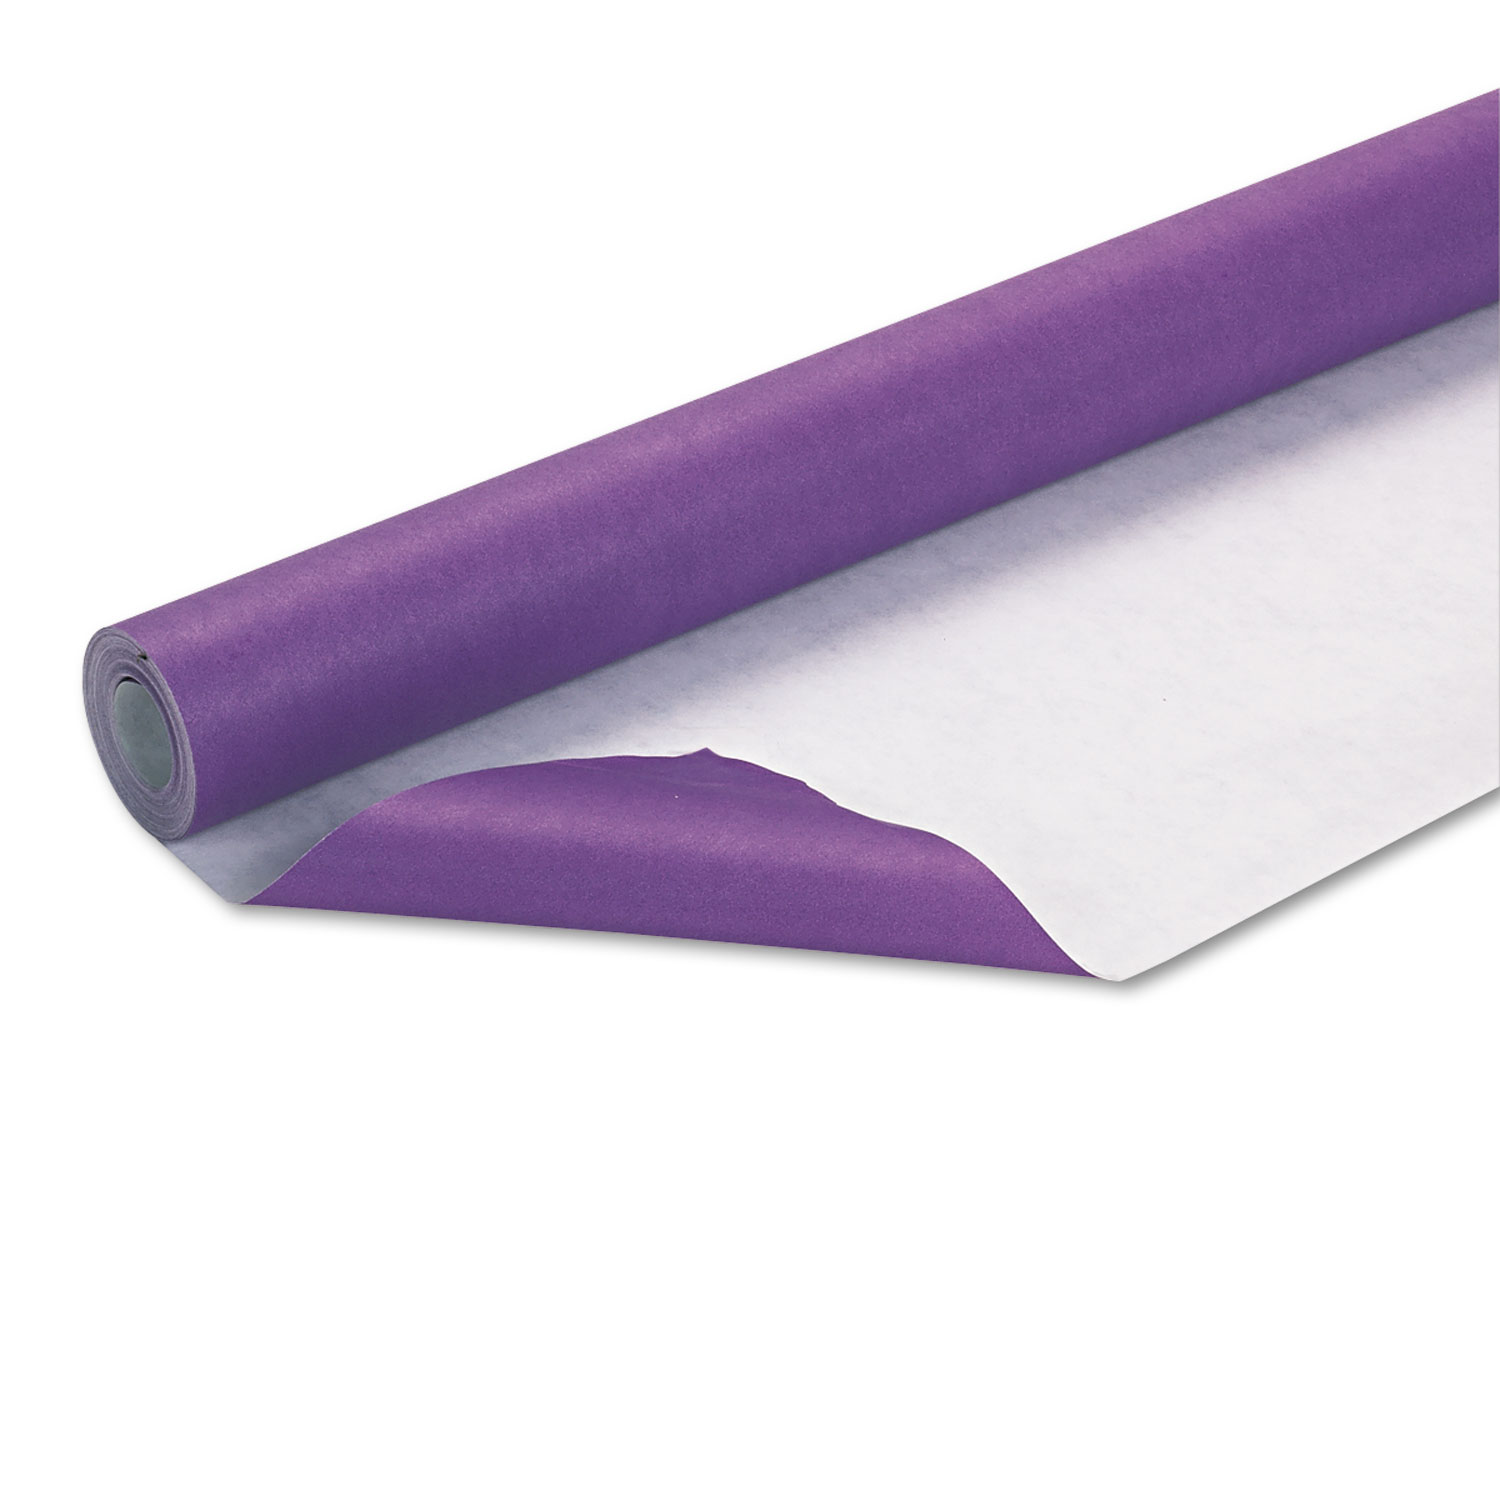  Pacon 57335 Fadeless Paper Roll, 50lb, 48 x 50ft, Violet (PAC57335) 